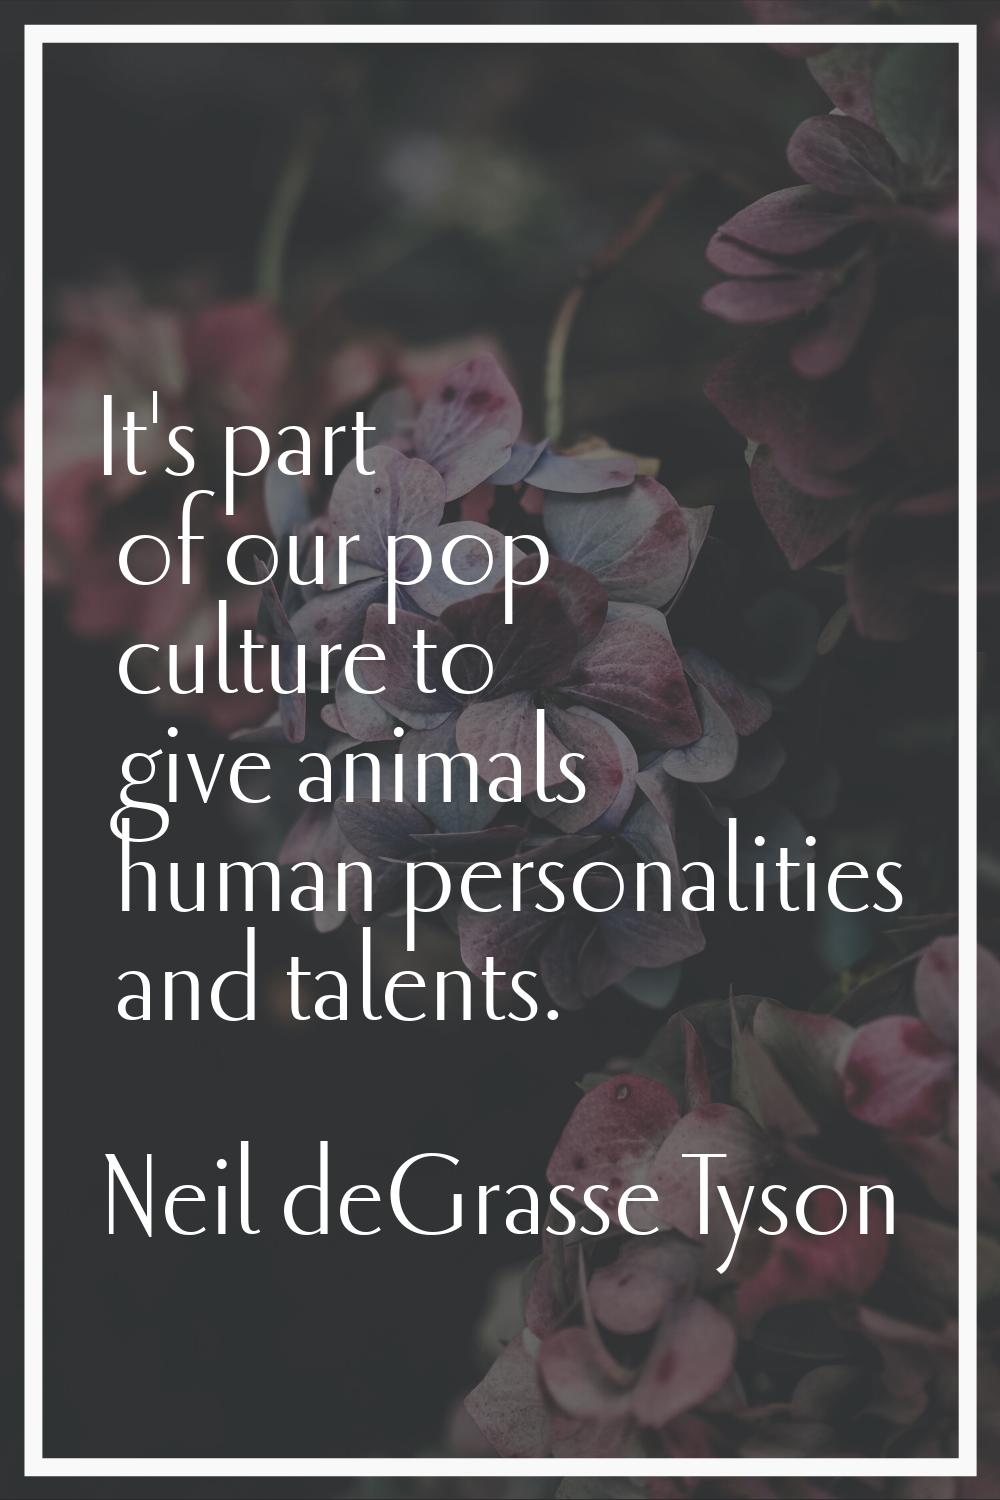 It's part of our pop culture to give animals human personalities and talents.